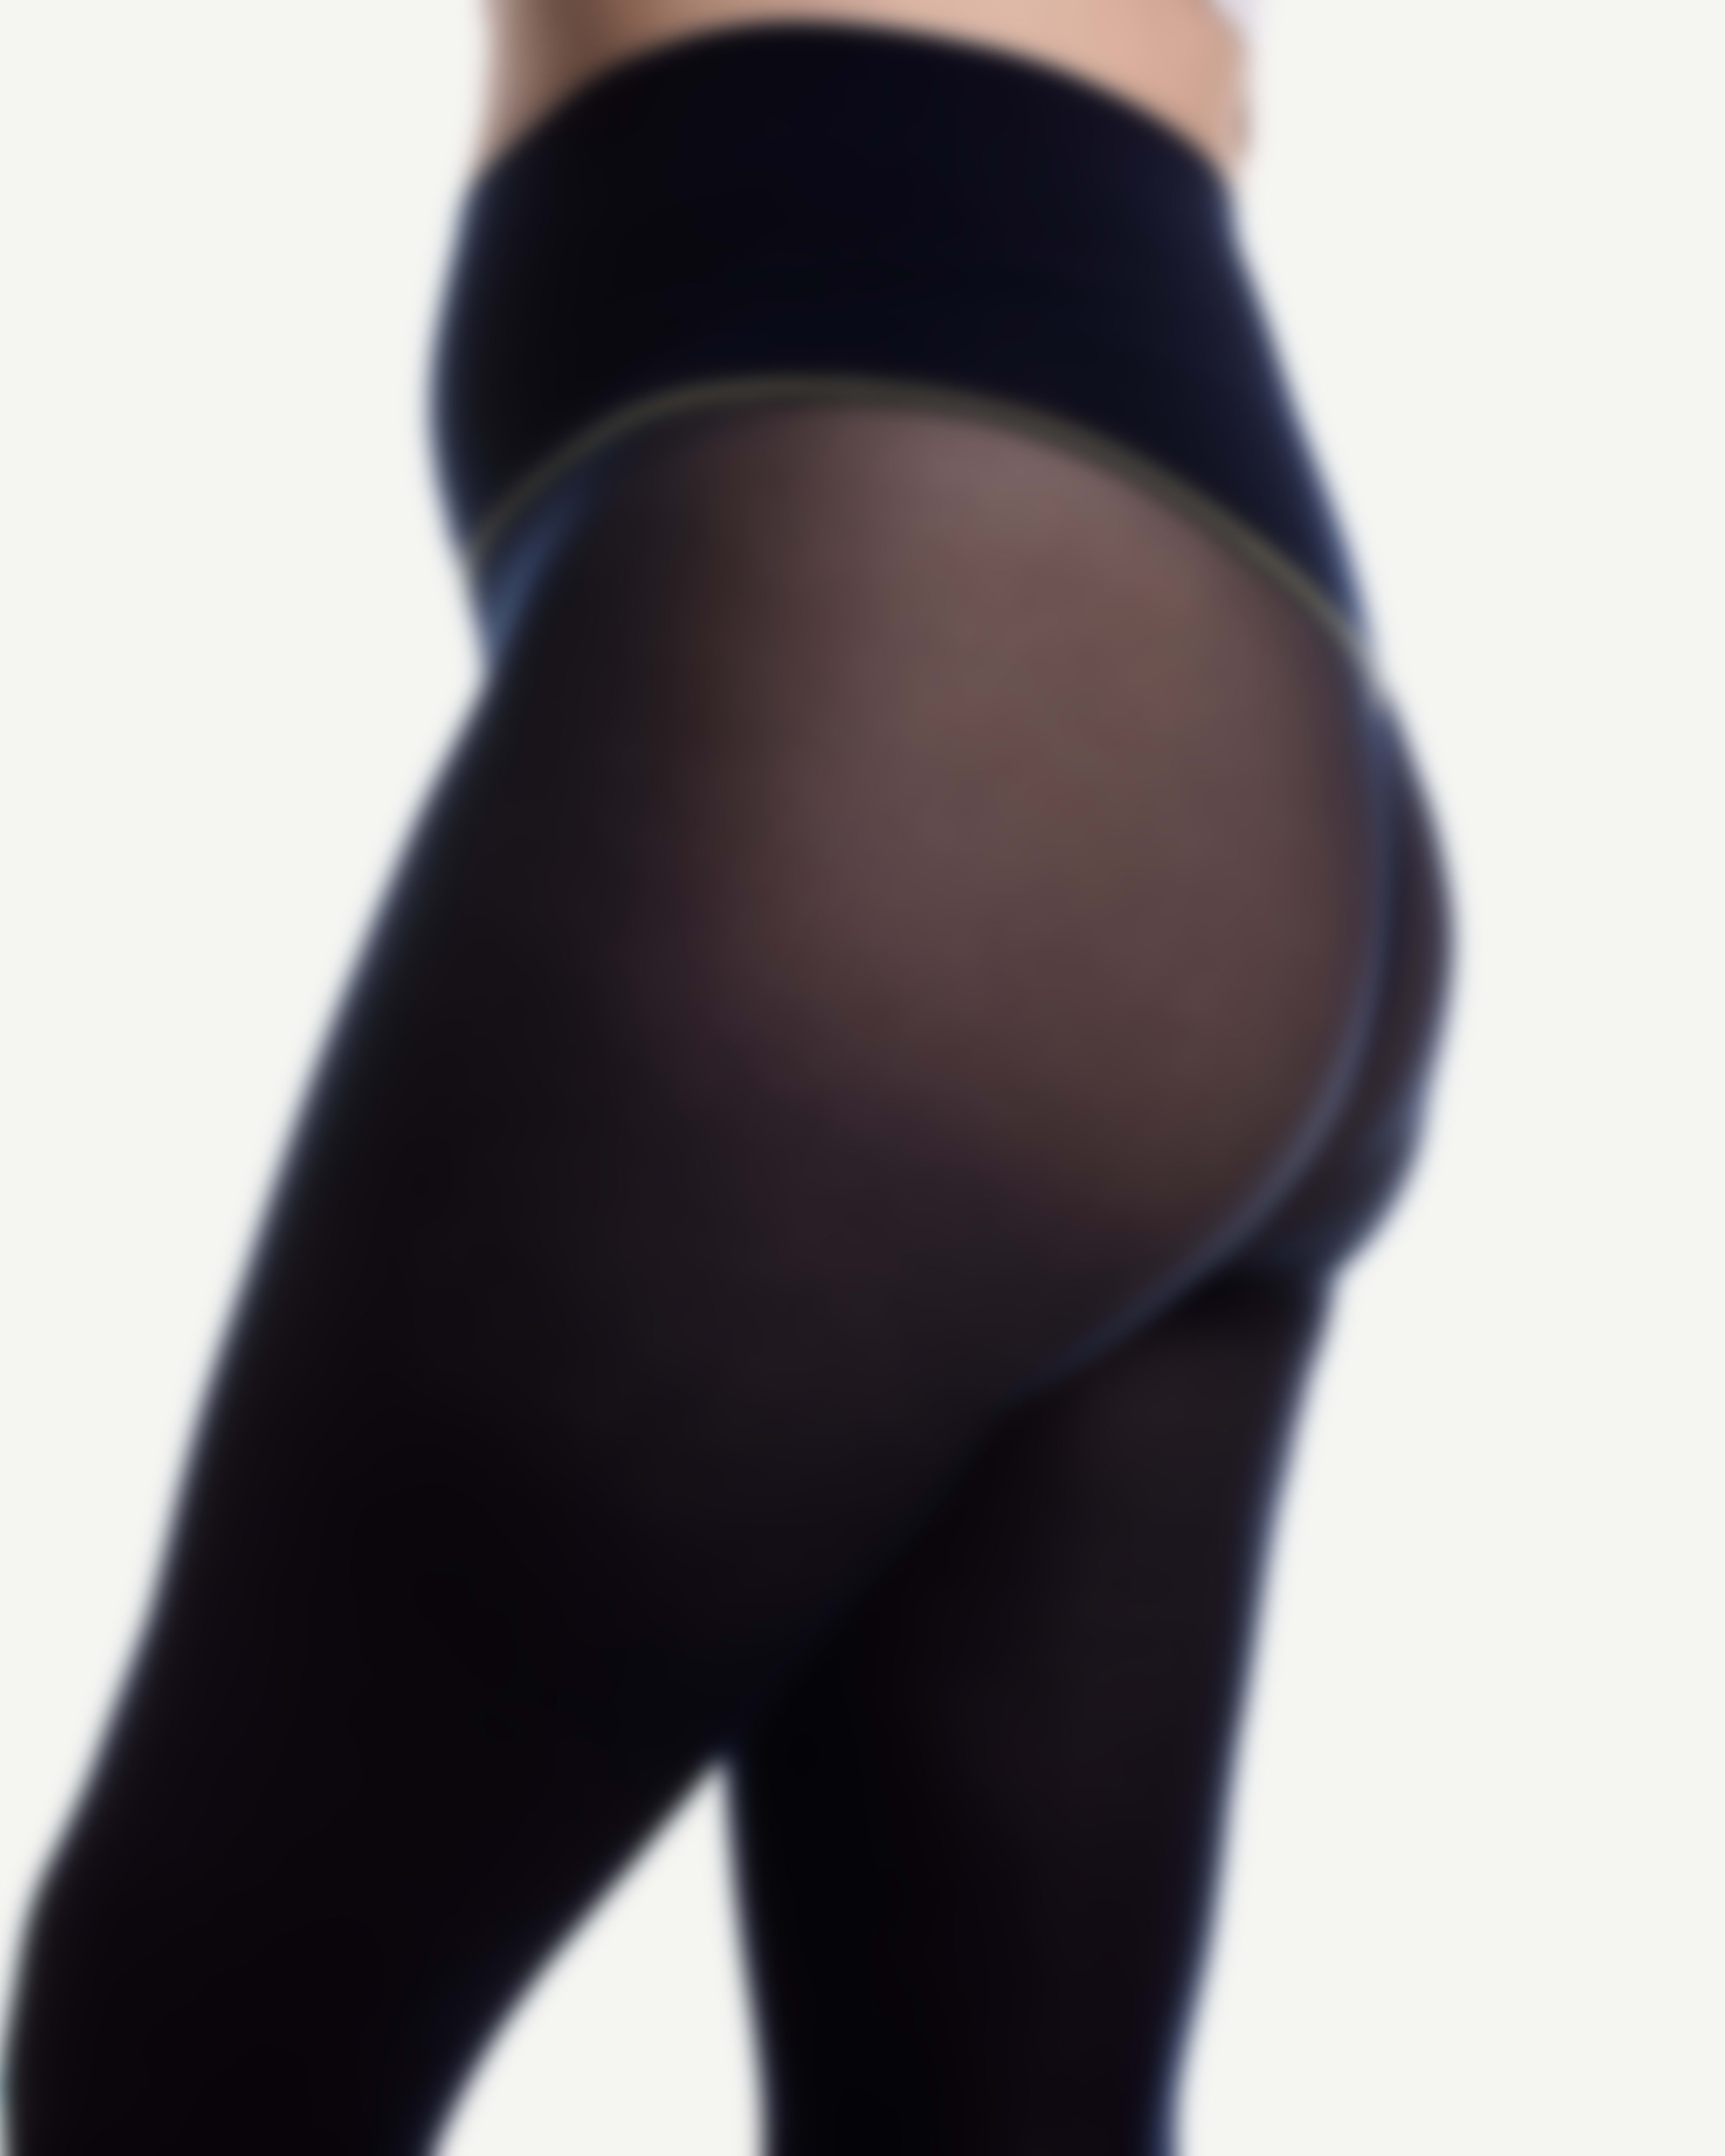 null, Fine-Rib Classic Sheer Rip-Resist Tights in Navy, navy-fine-rib-classic-semi-sheer-tights, sheertex, product image, unbreakable tights, model